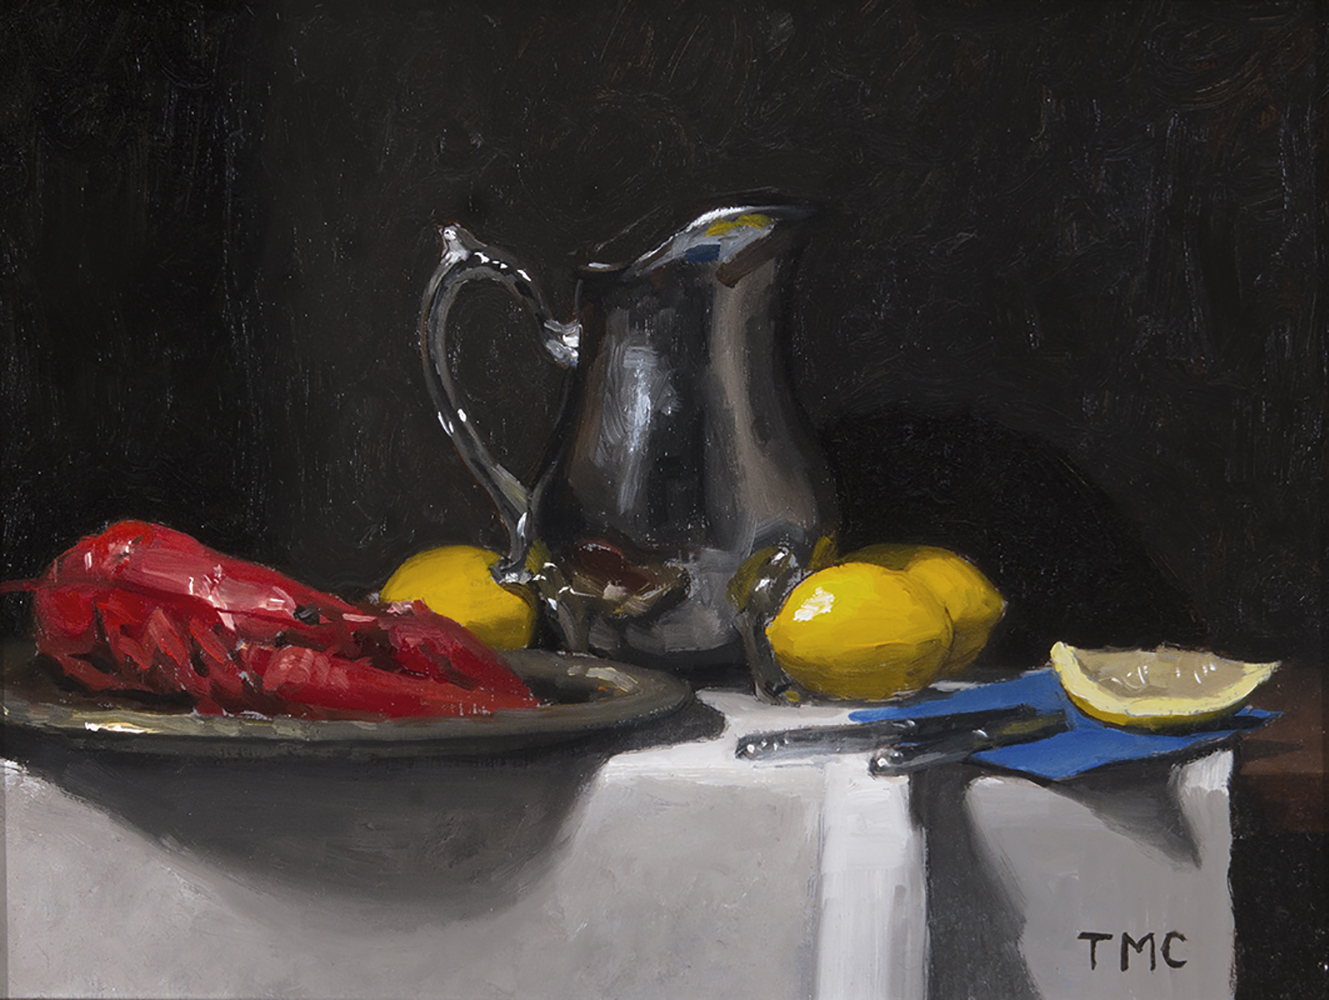 todd_m_casey_tc1070_study_with_lobster.jpg